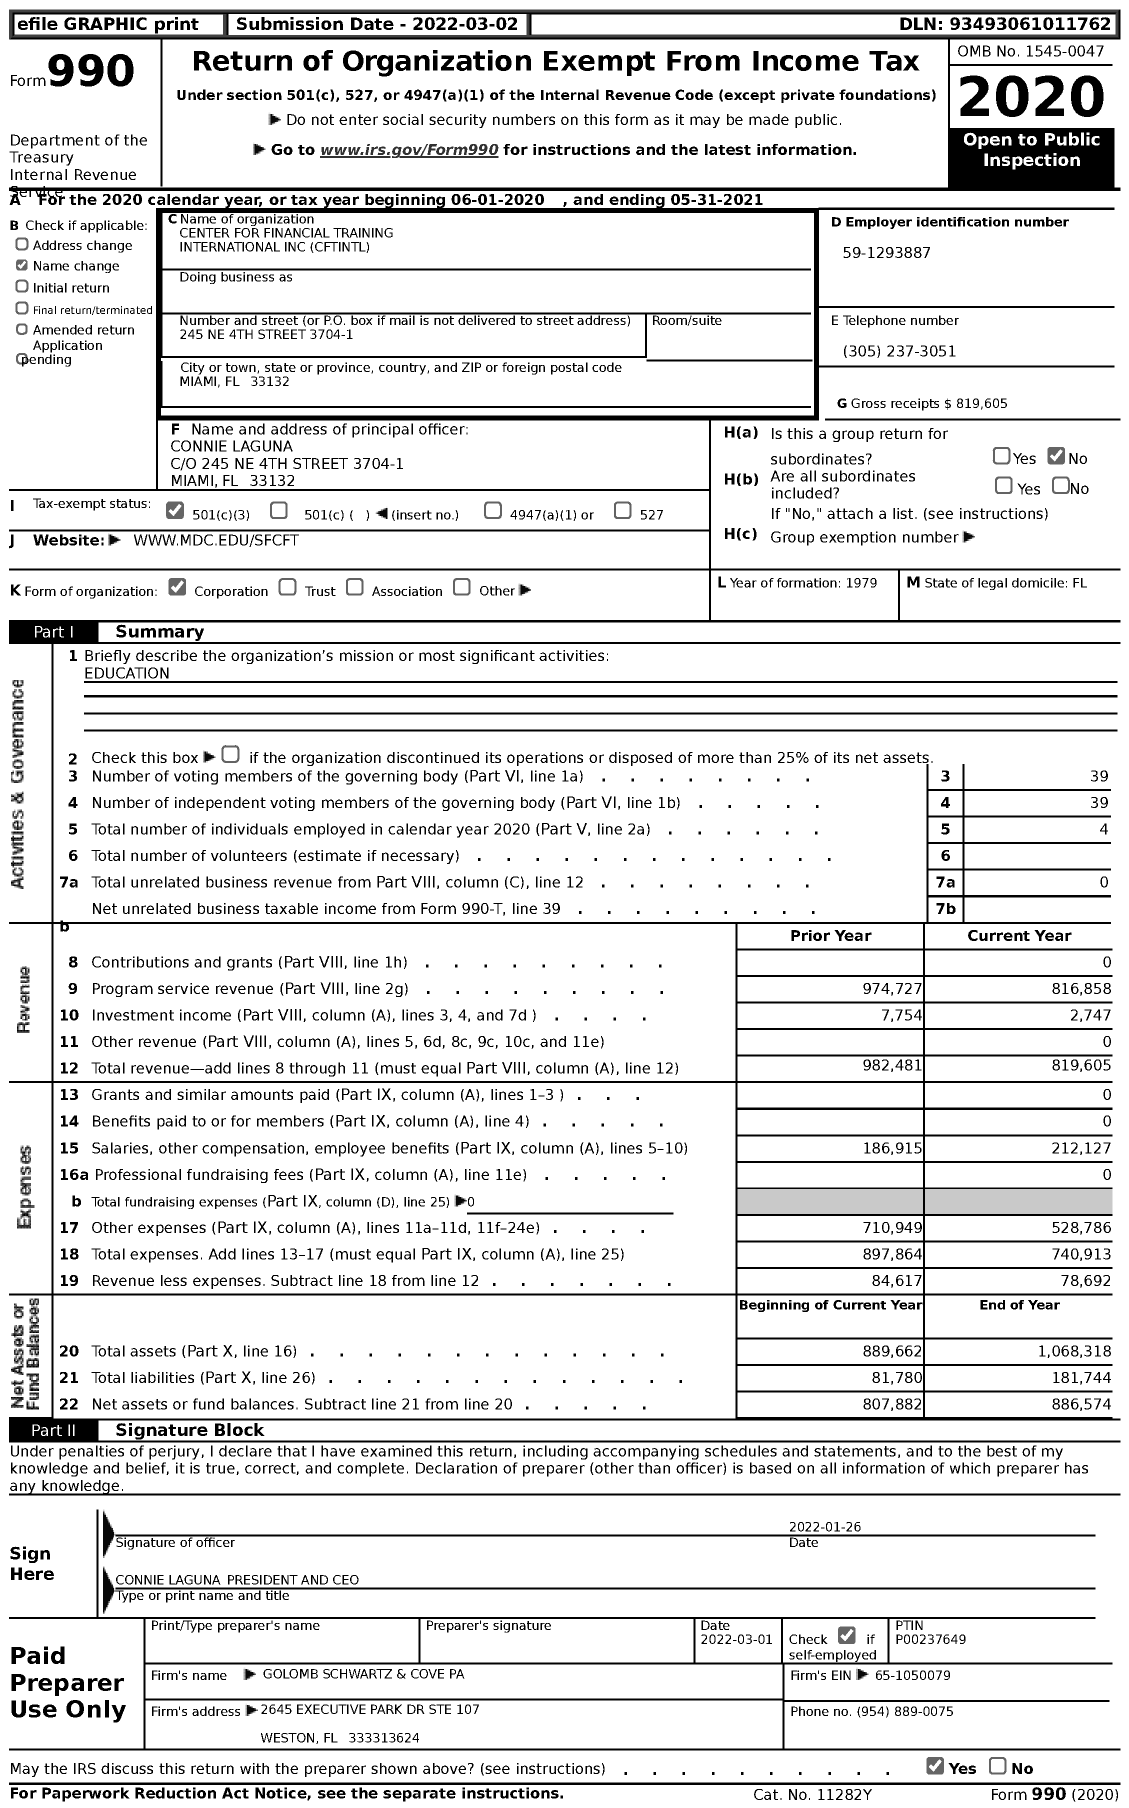 Image of first page of 2020 Form 990 for Center for Financial Training International